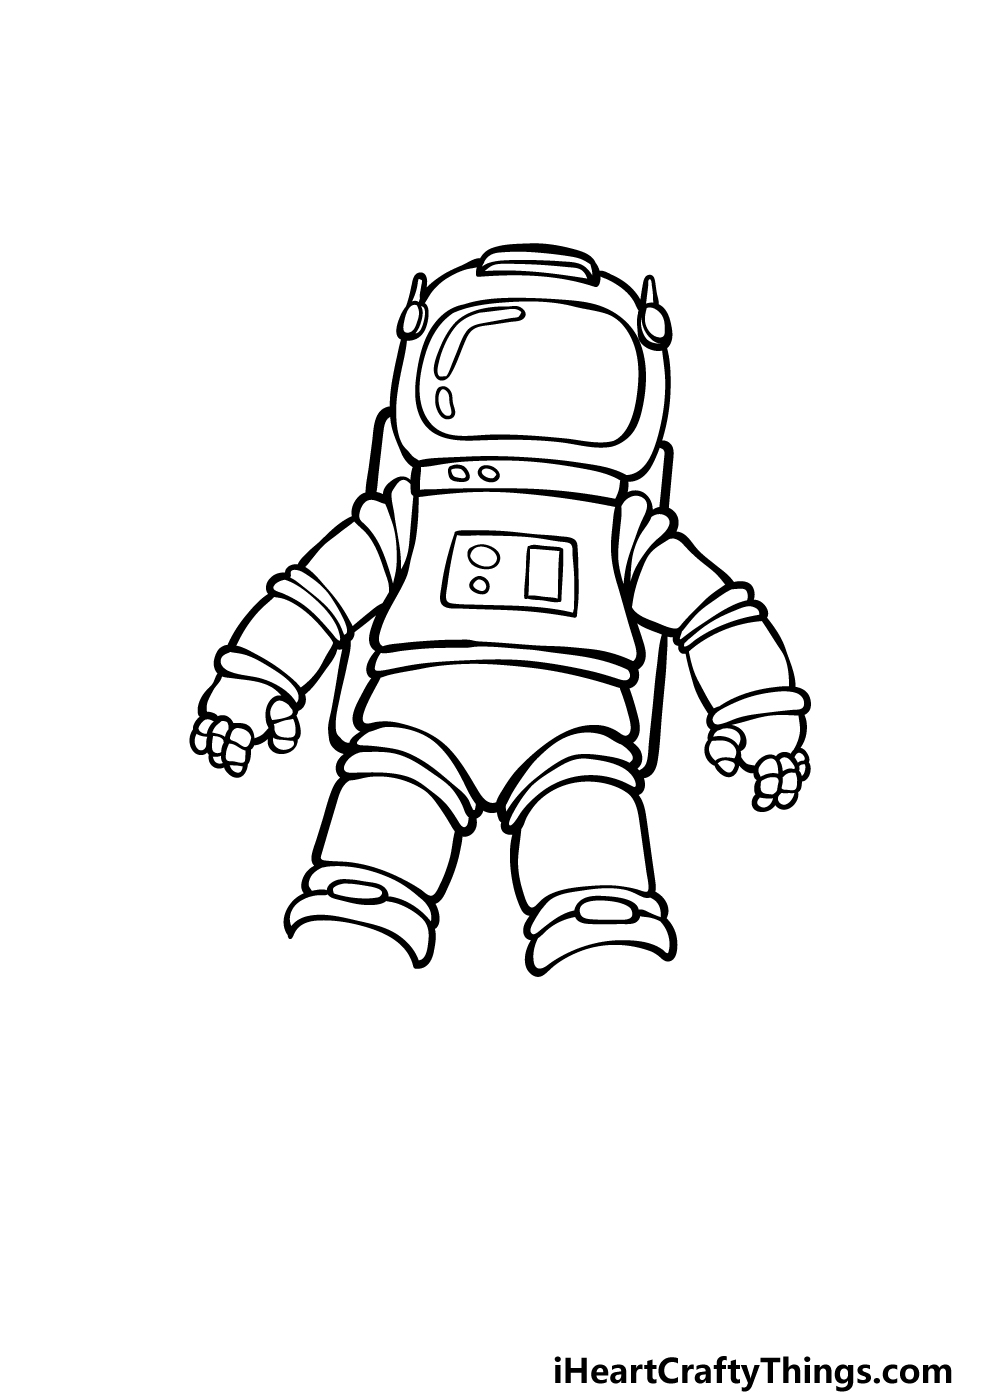 How to draw a space suit